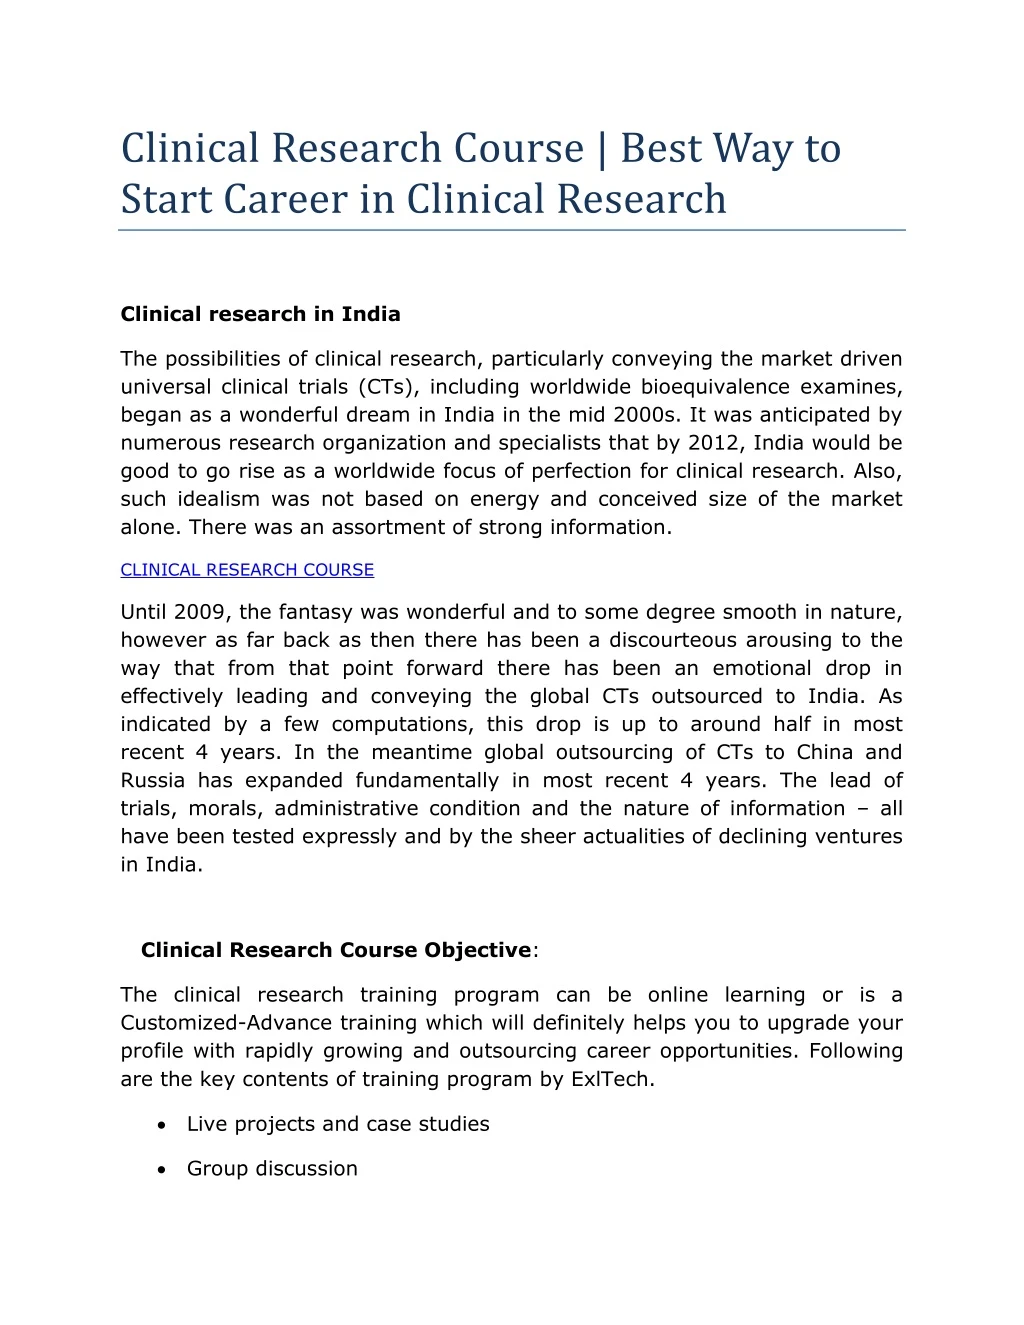 clinical research course best way to start career